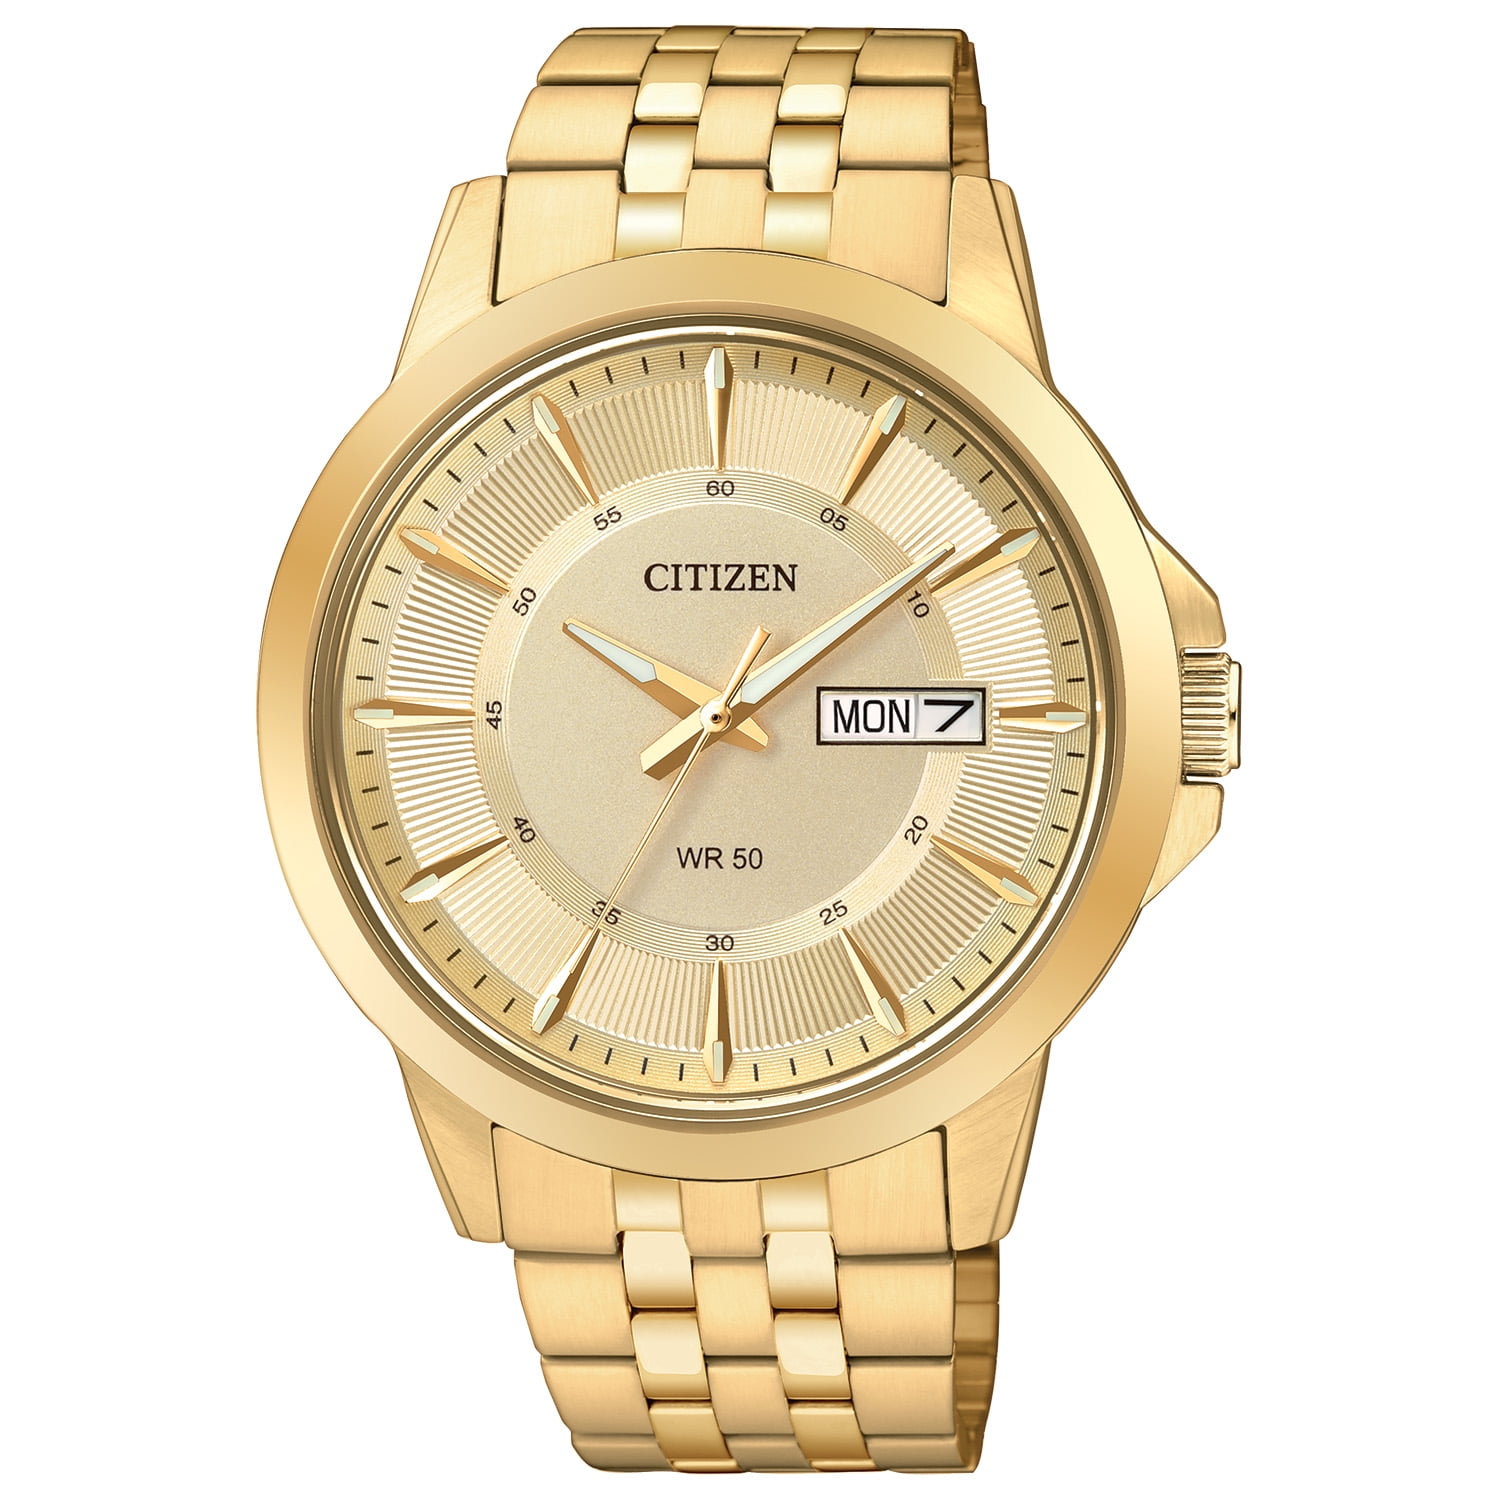 Citizen Men's Gold-Tone Stainless Steel Watch - BF2013-56P 